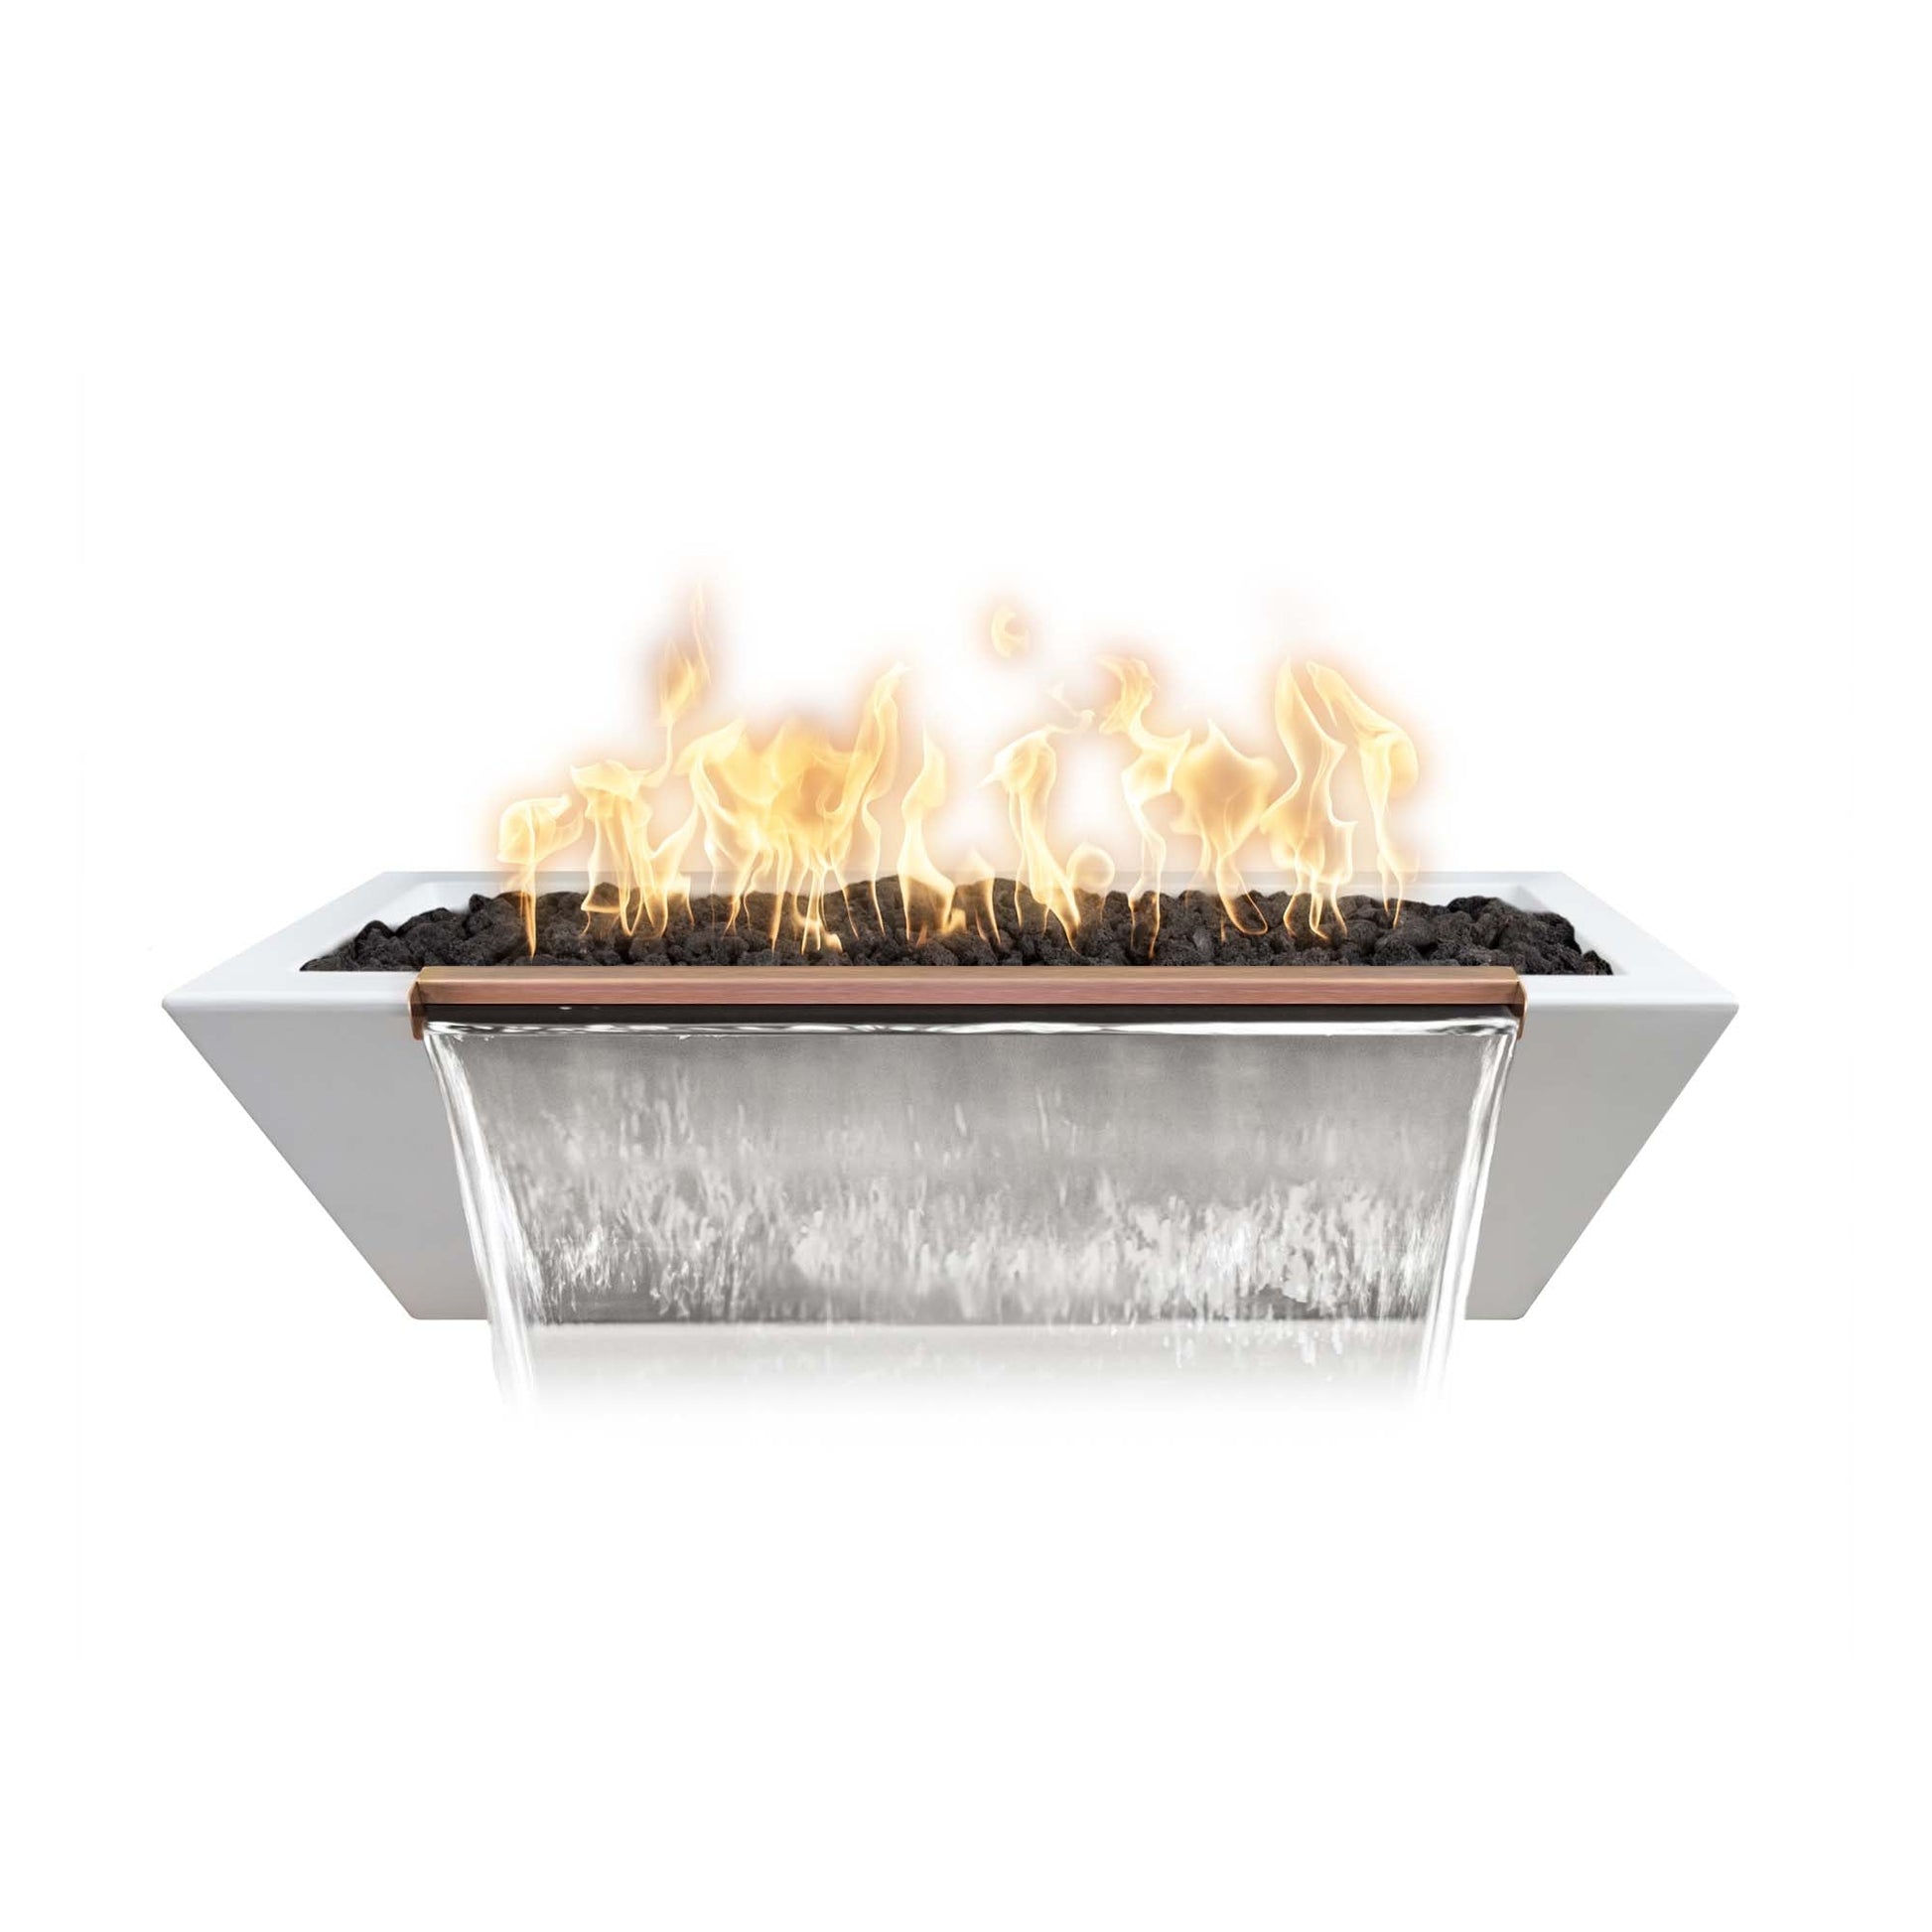 The Outdoor Plus Linear Maya 60" Metallic Slate GFRC Concrete Natural Gas Fire & Water Bowl with Match Lit Ignition